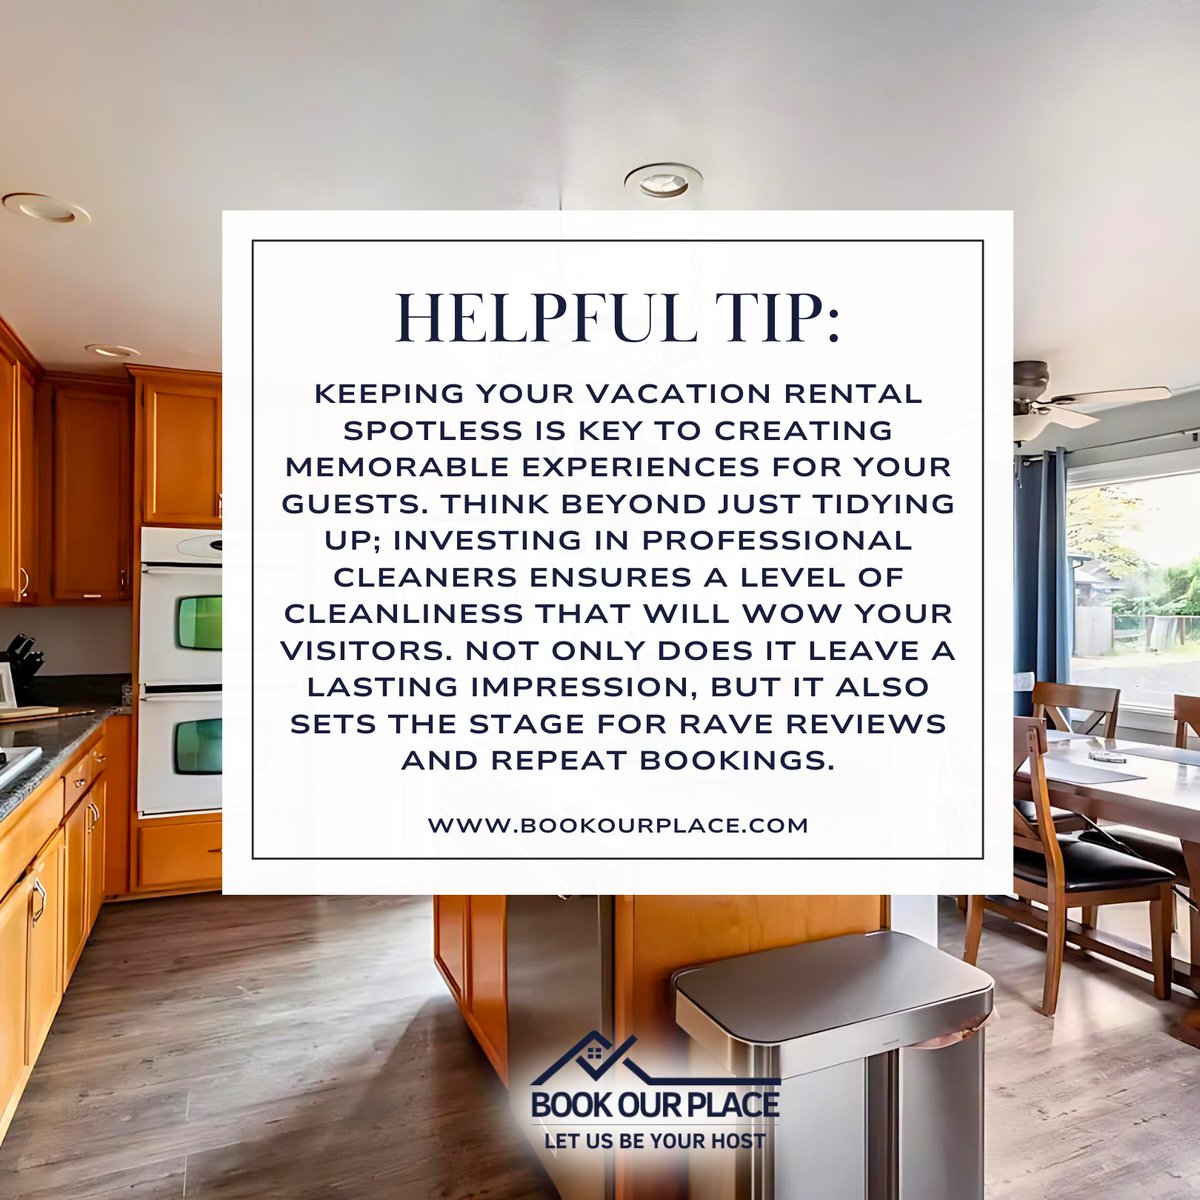 Discover why maintaining spotless cleanliness is the secret ingredient to unforgettable guest experiences!
Dive into our blog for more tips:
bookourplace.com/tips-for-maxim…

#BookOurPlace #PropertyManagement #ShortTermRentals #VacationRental